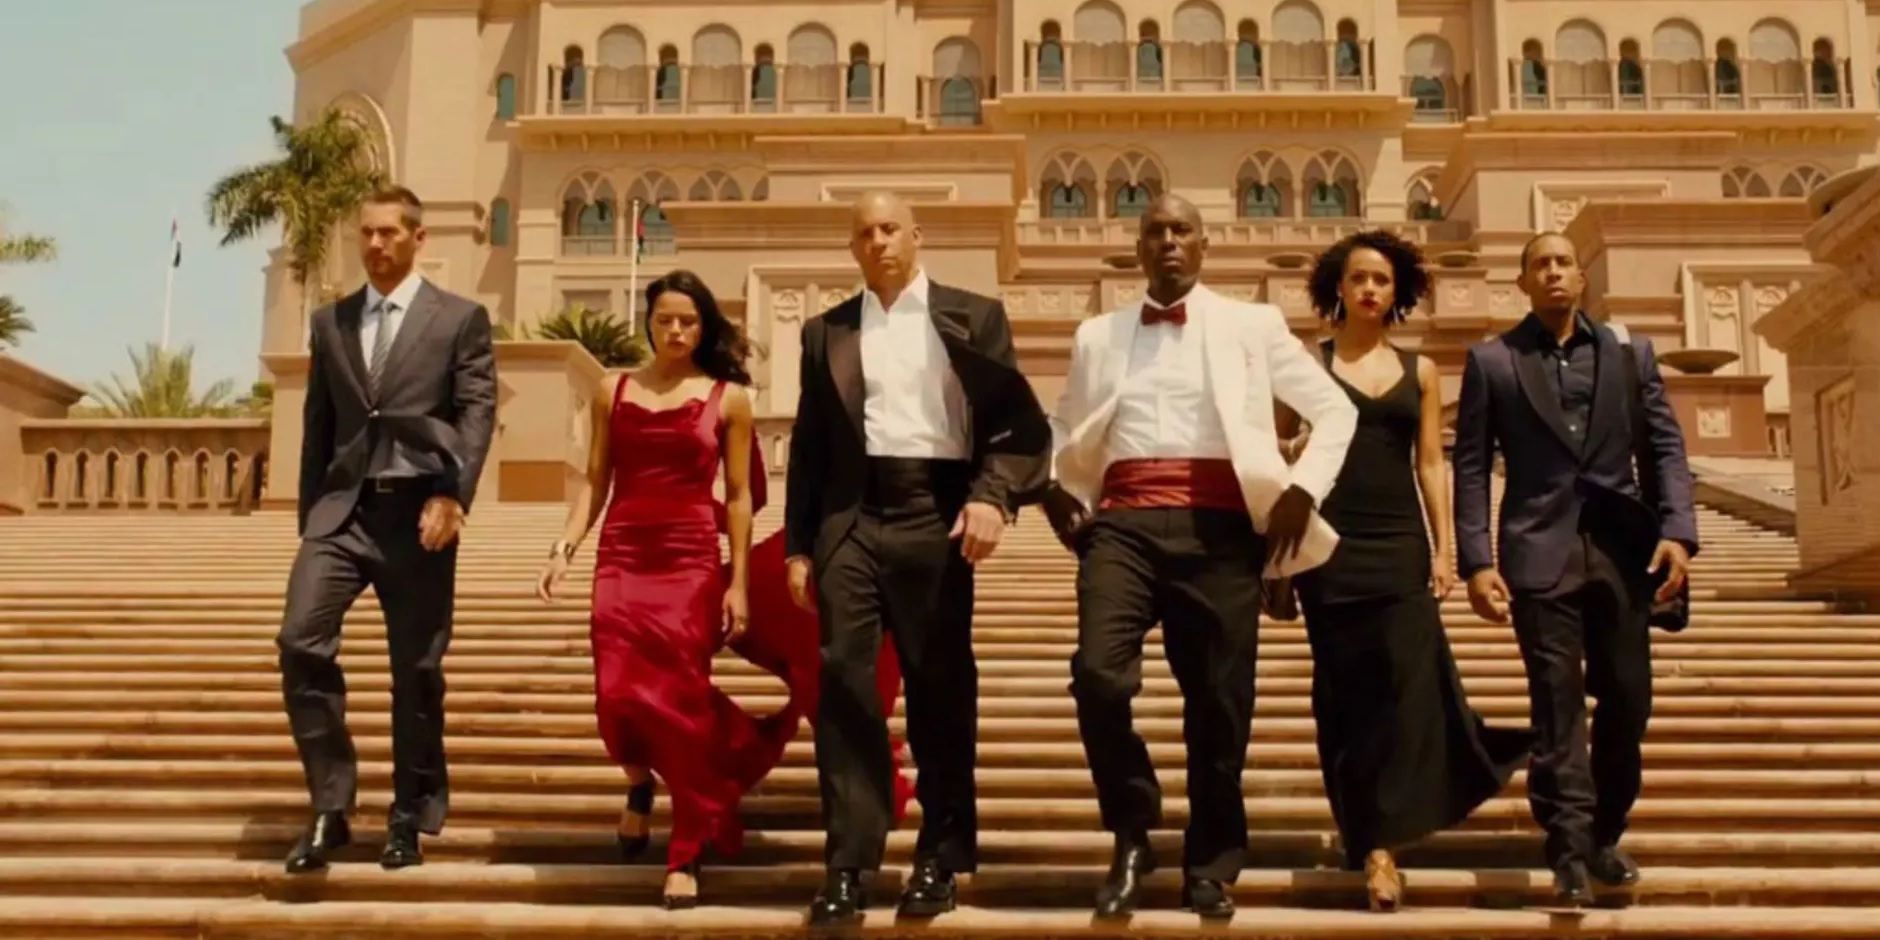 Dom Toretto and his team in Abu Dhabi in Furious 7